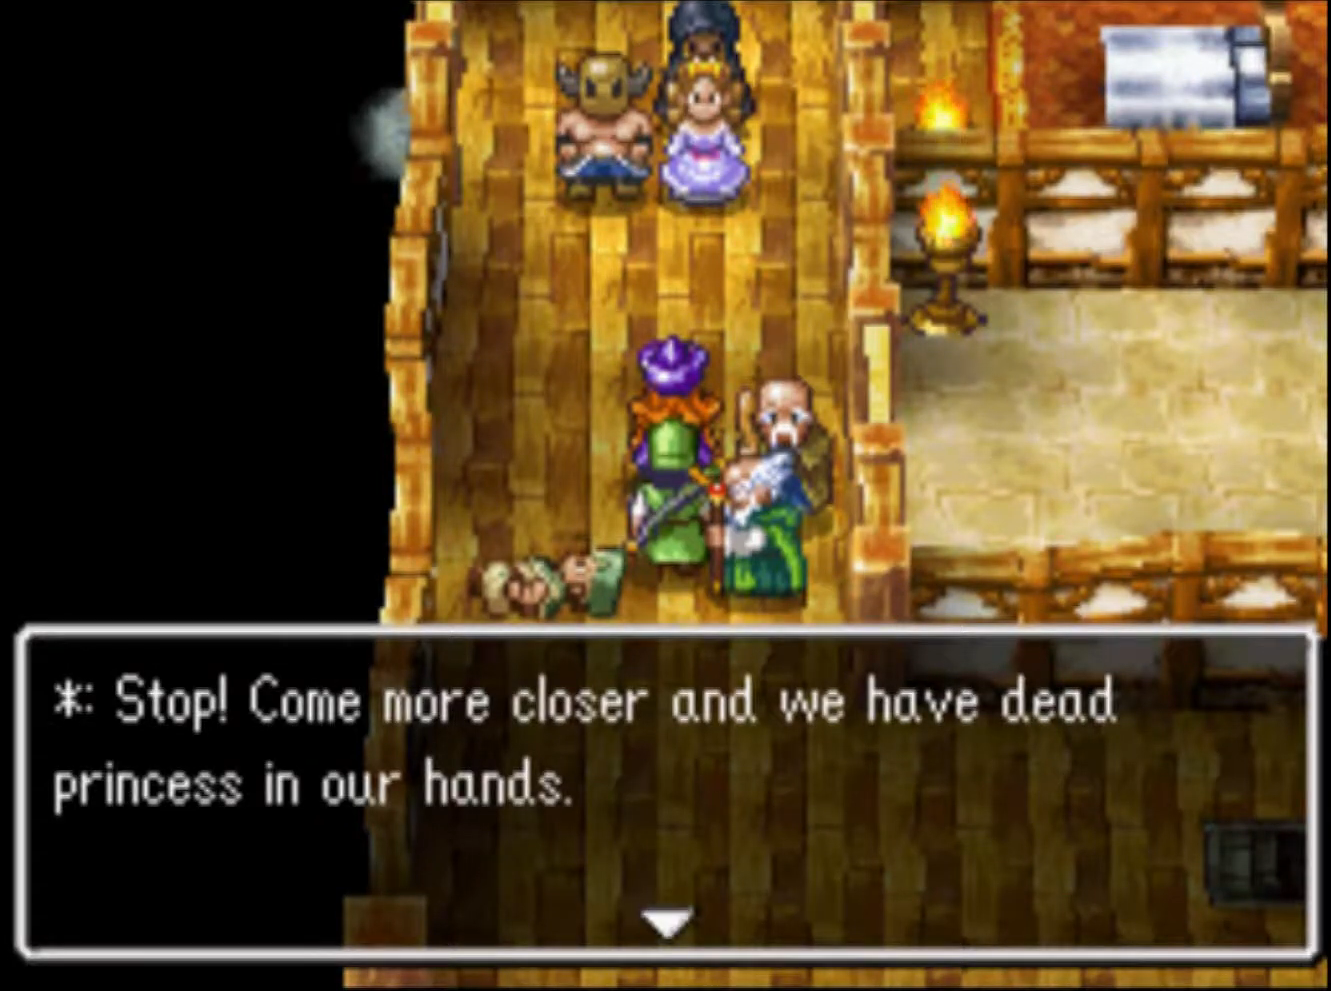 The fake princess will be kidnapped (3) | Dragon Quest IV